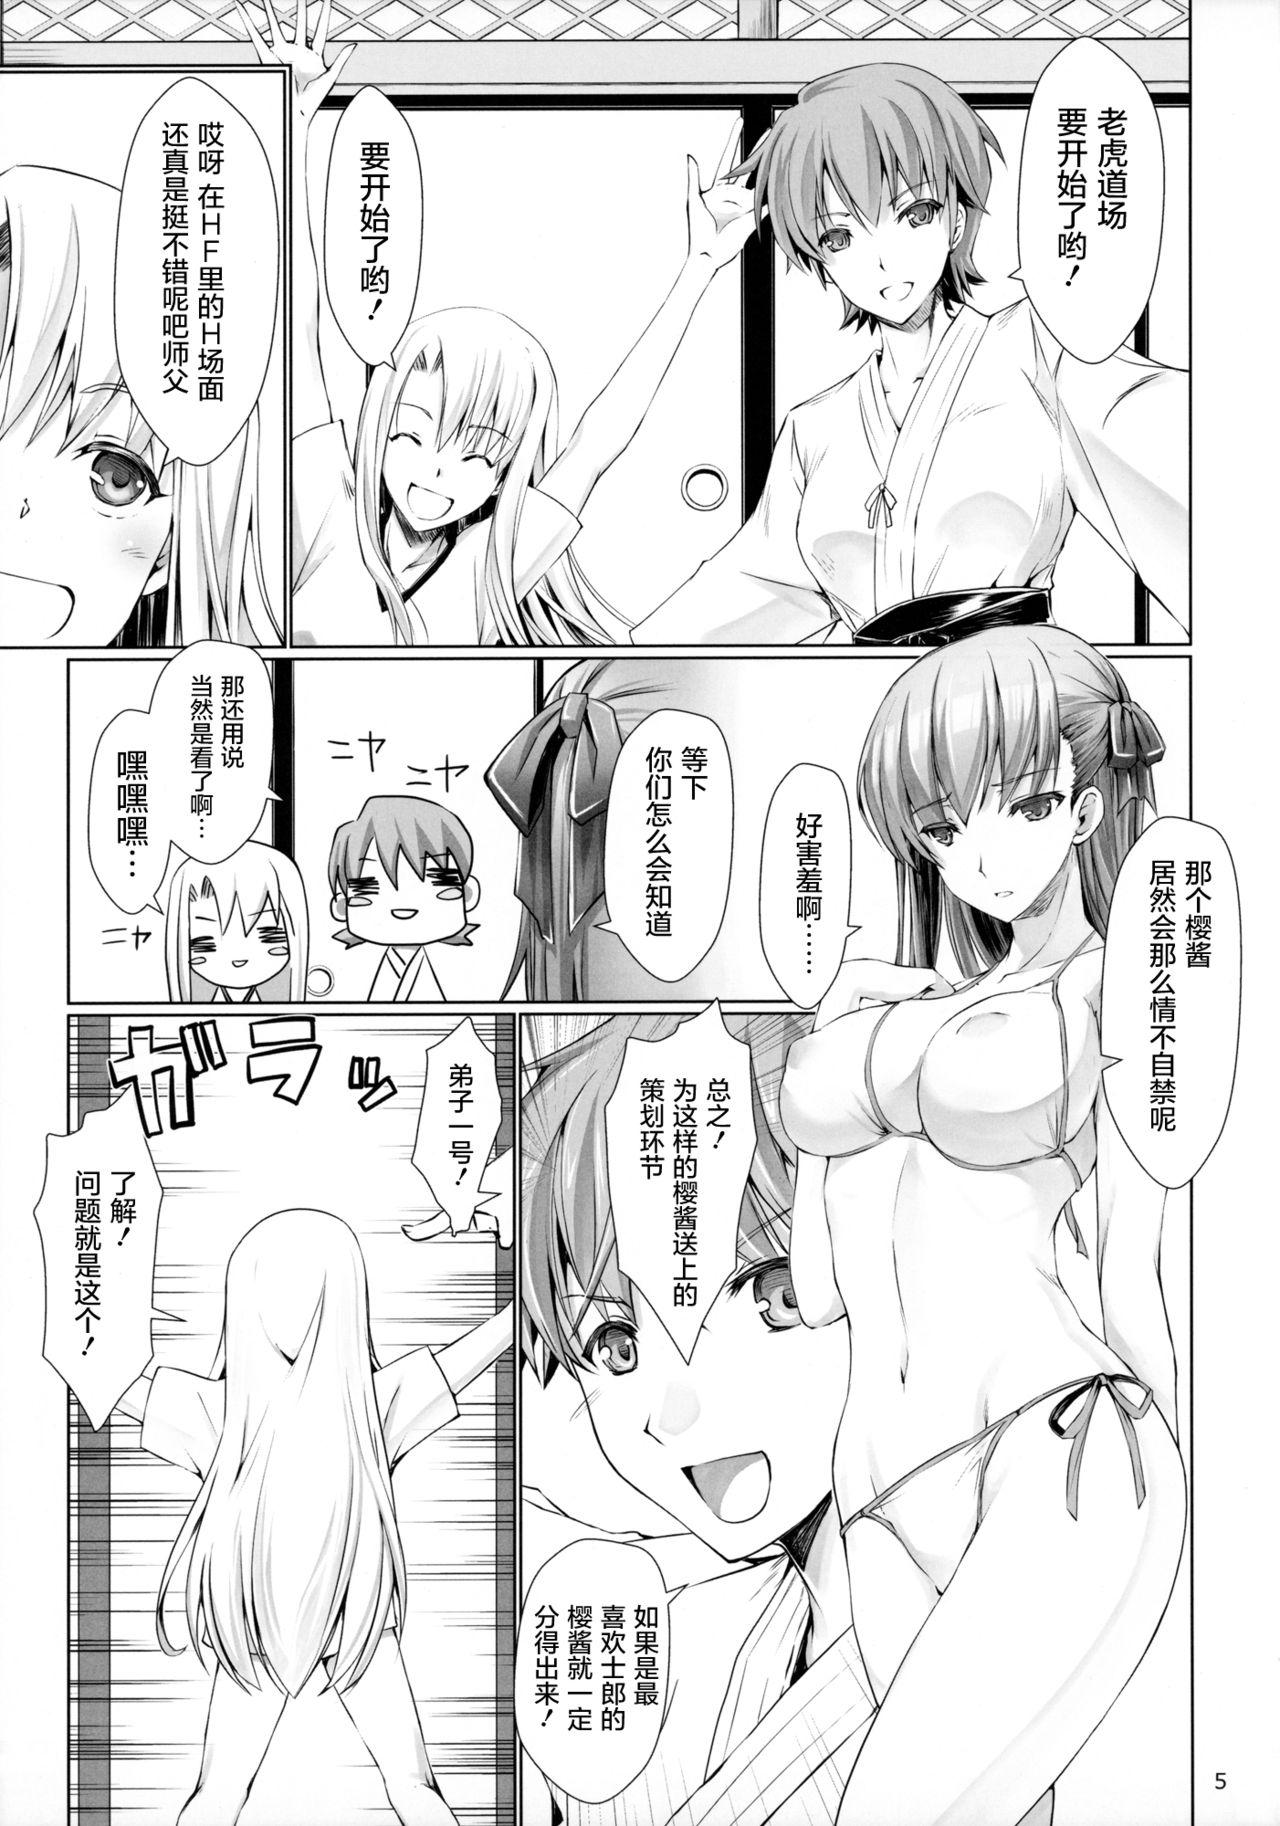 Hot Girl Fuck I miss you. - Fate stay night Threesome - Page 5